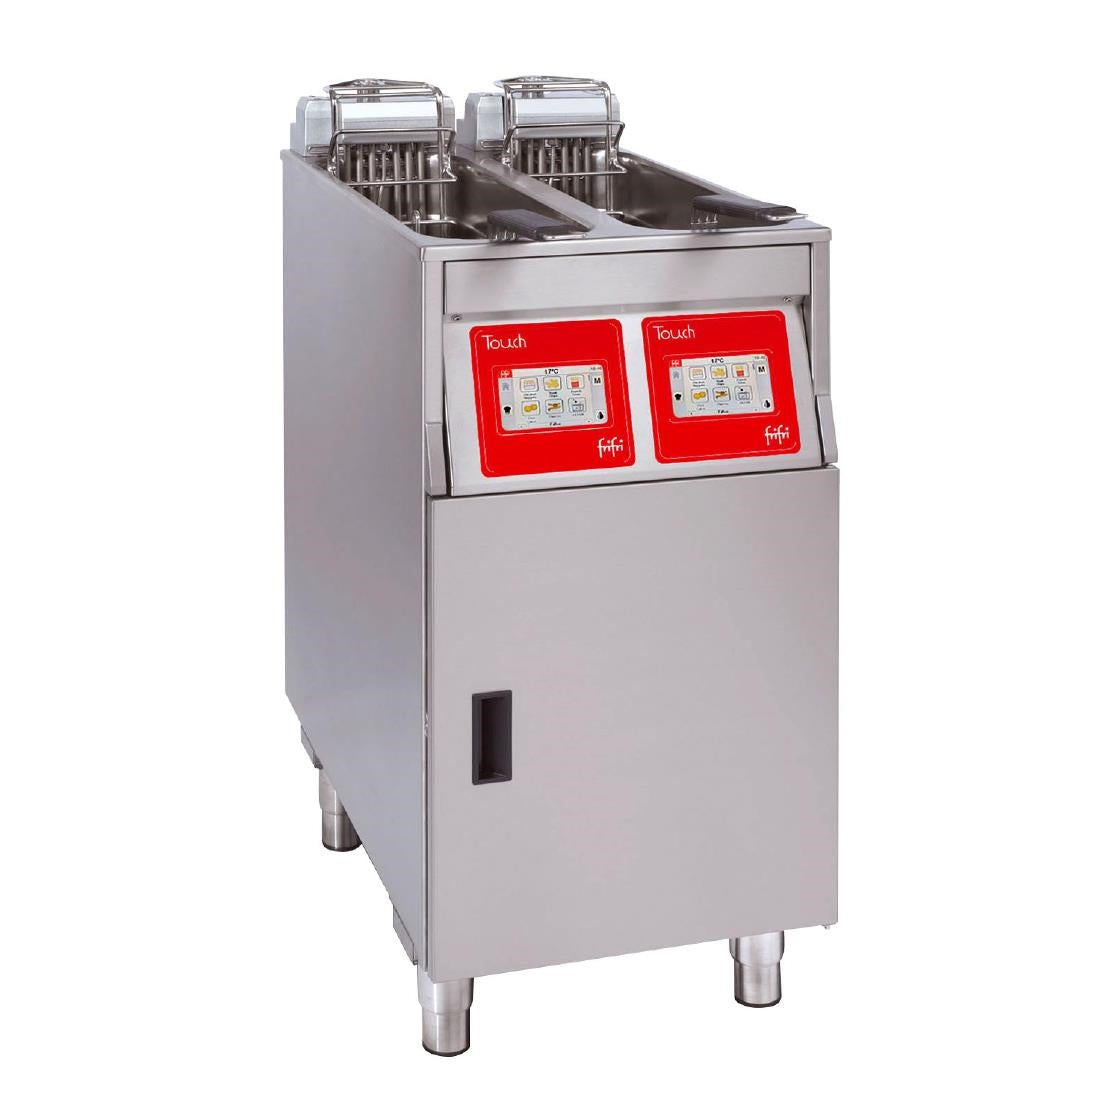 HS013-1PH FriFri Touch 422 Electric Free-Standing Twin Tank Fryer 2 Baskets 2x 9kW - Three Phase